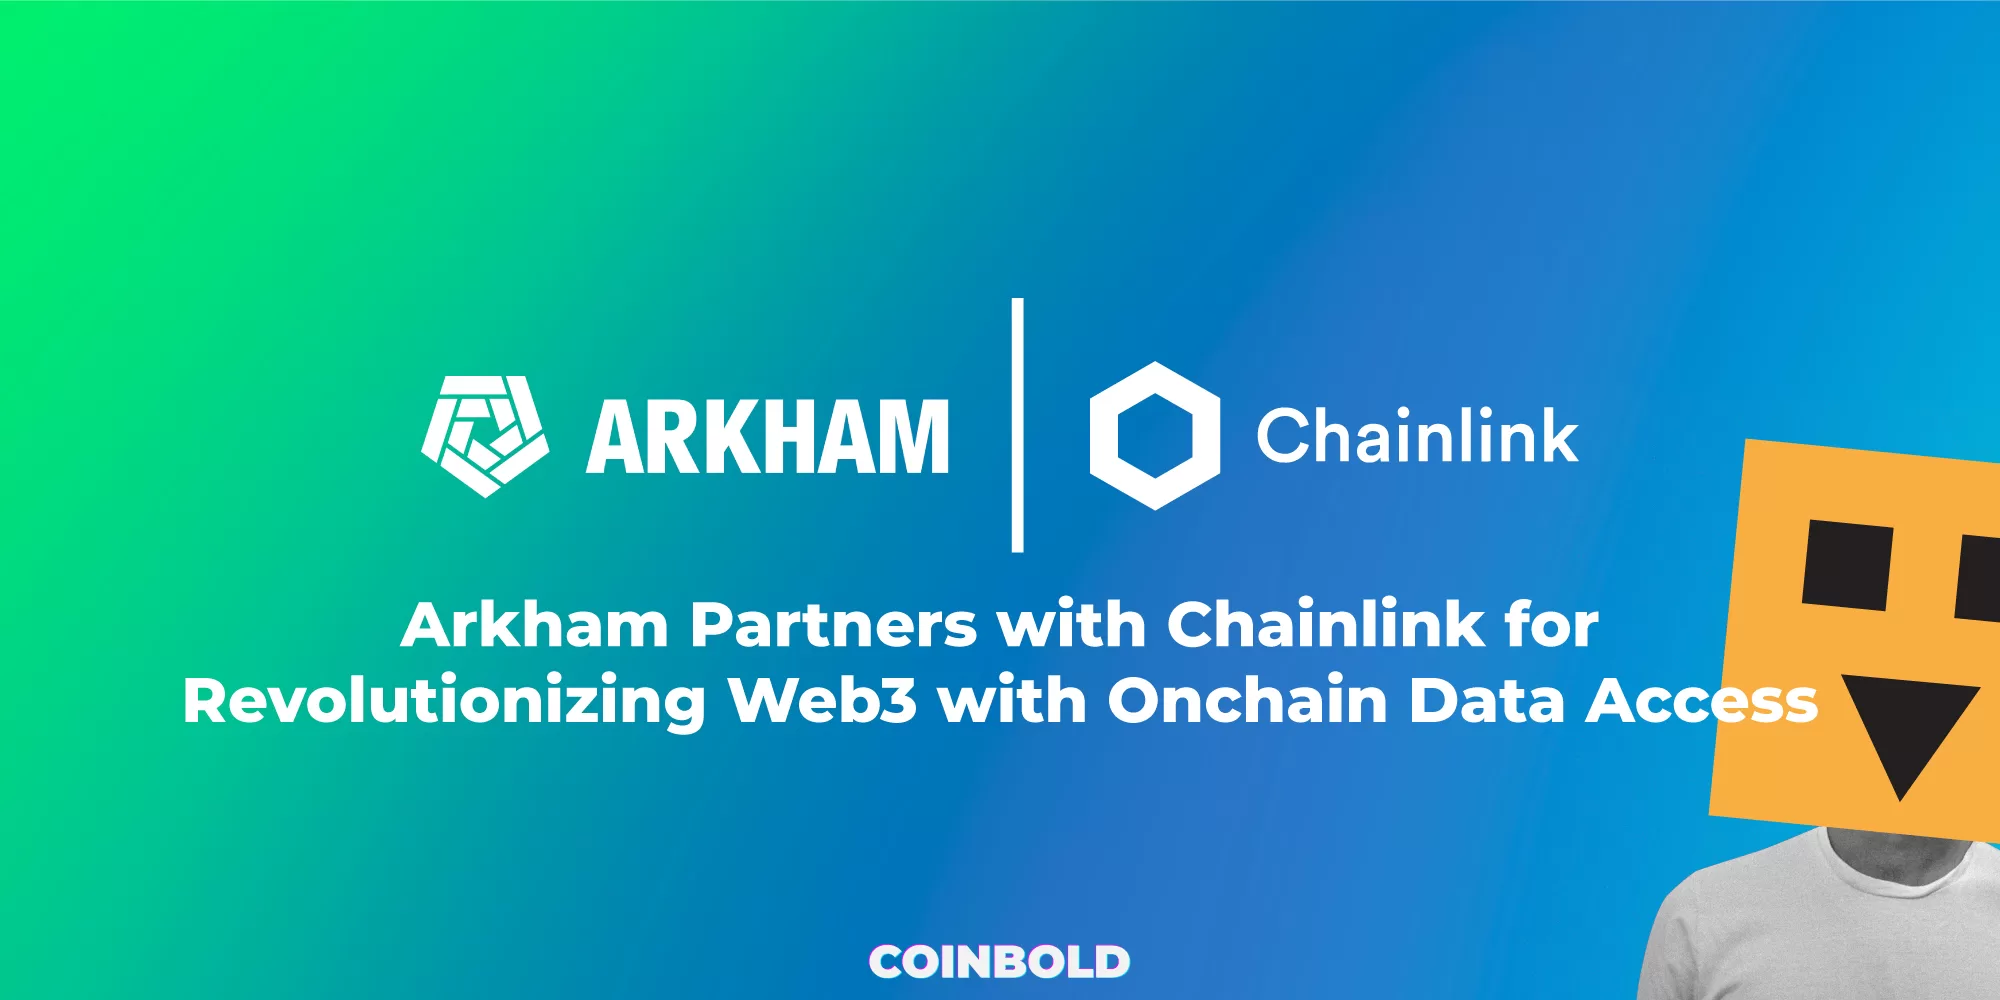 Arkham Partners with Chainlink for Revolutionizing Web3 with Onchain Data Access